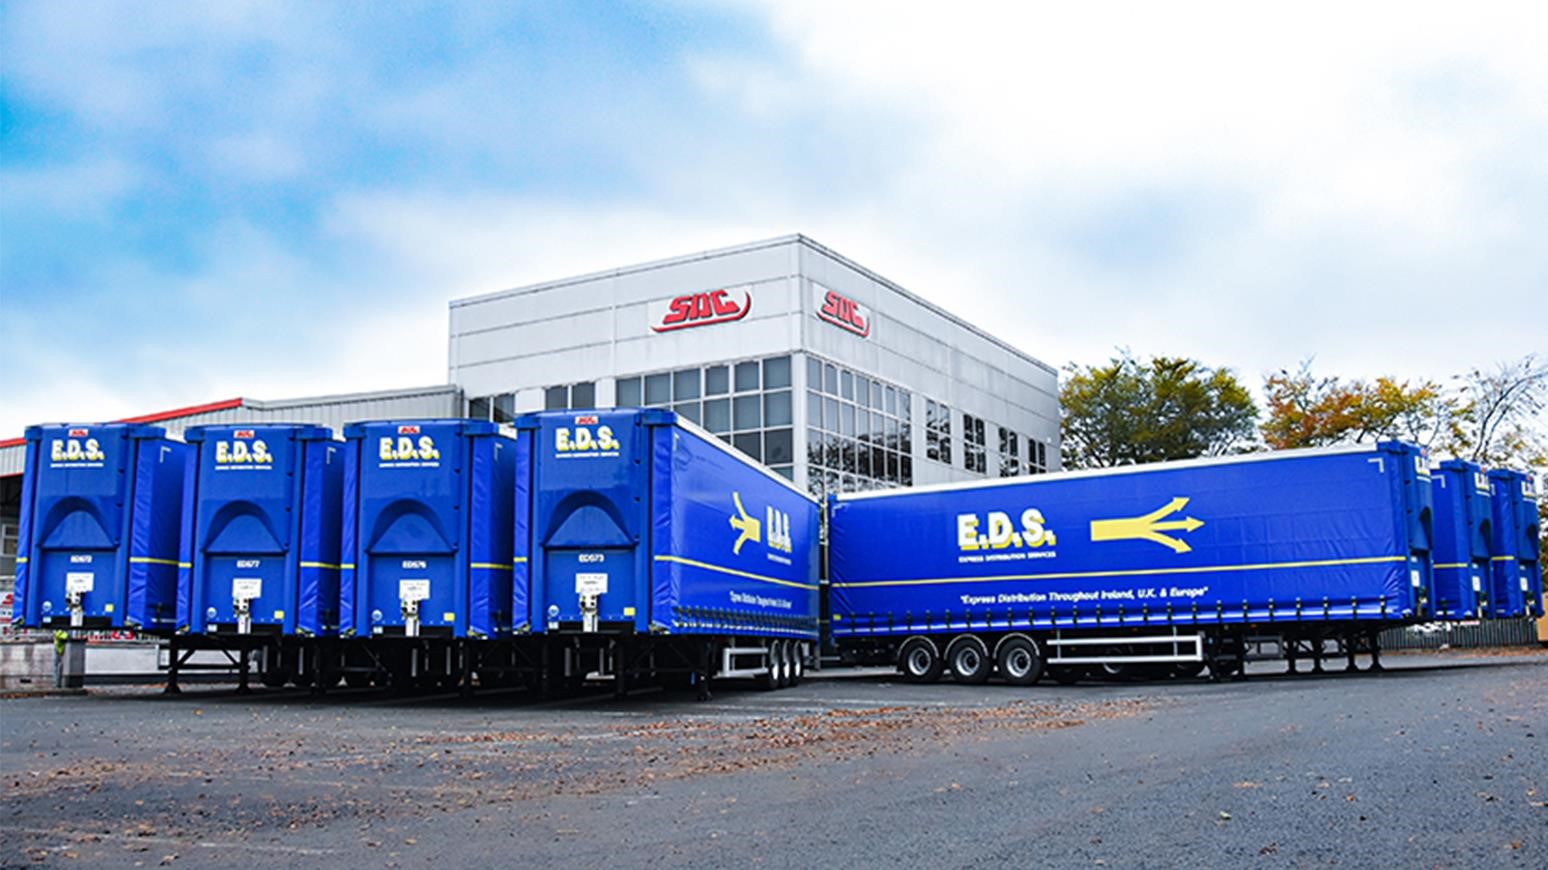 Irish Pallet Distributor Orders 15 SDC Trailers, Including 10 Freespan Curtainsiders & Five Double-Deck Curtainsiders